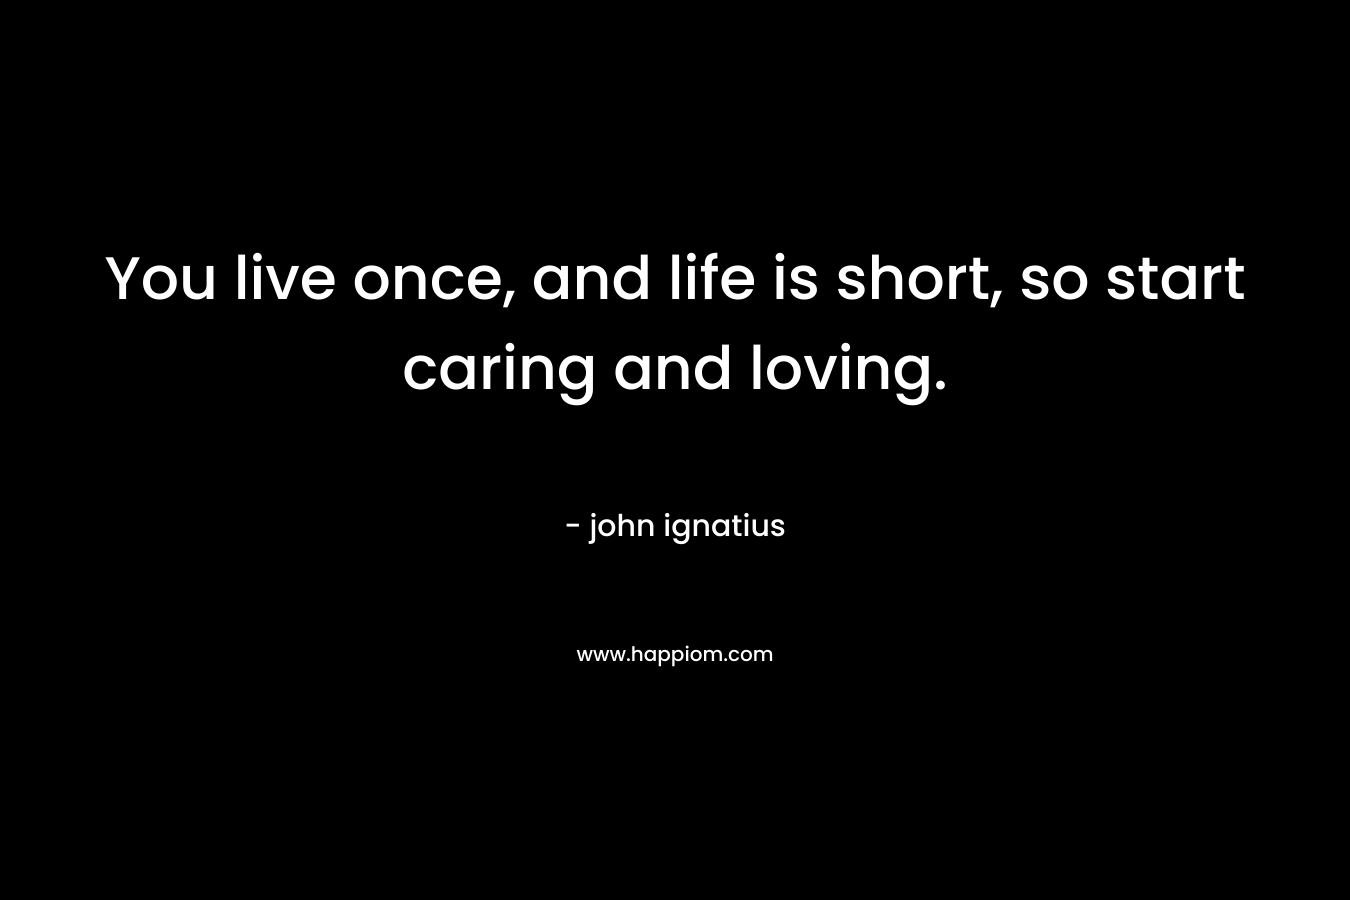 You live once, and life is short, so start caring and loving. – john ignatius